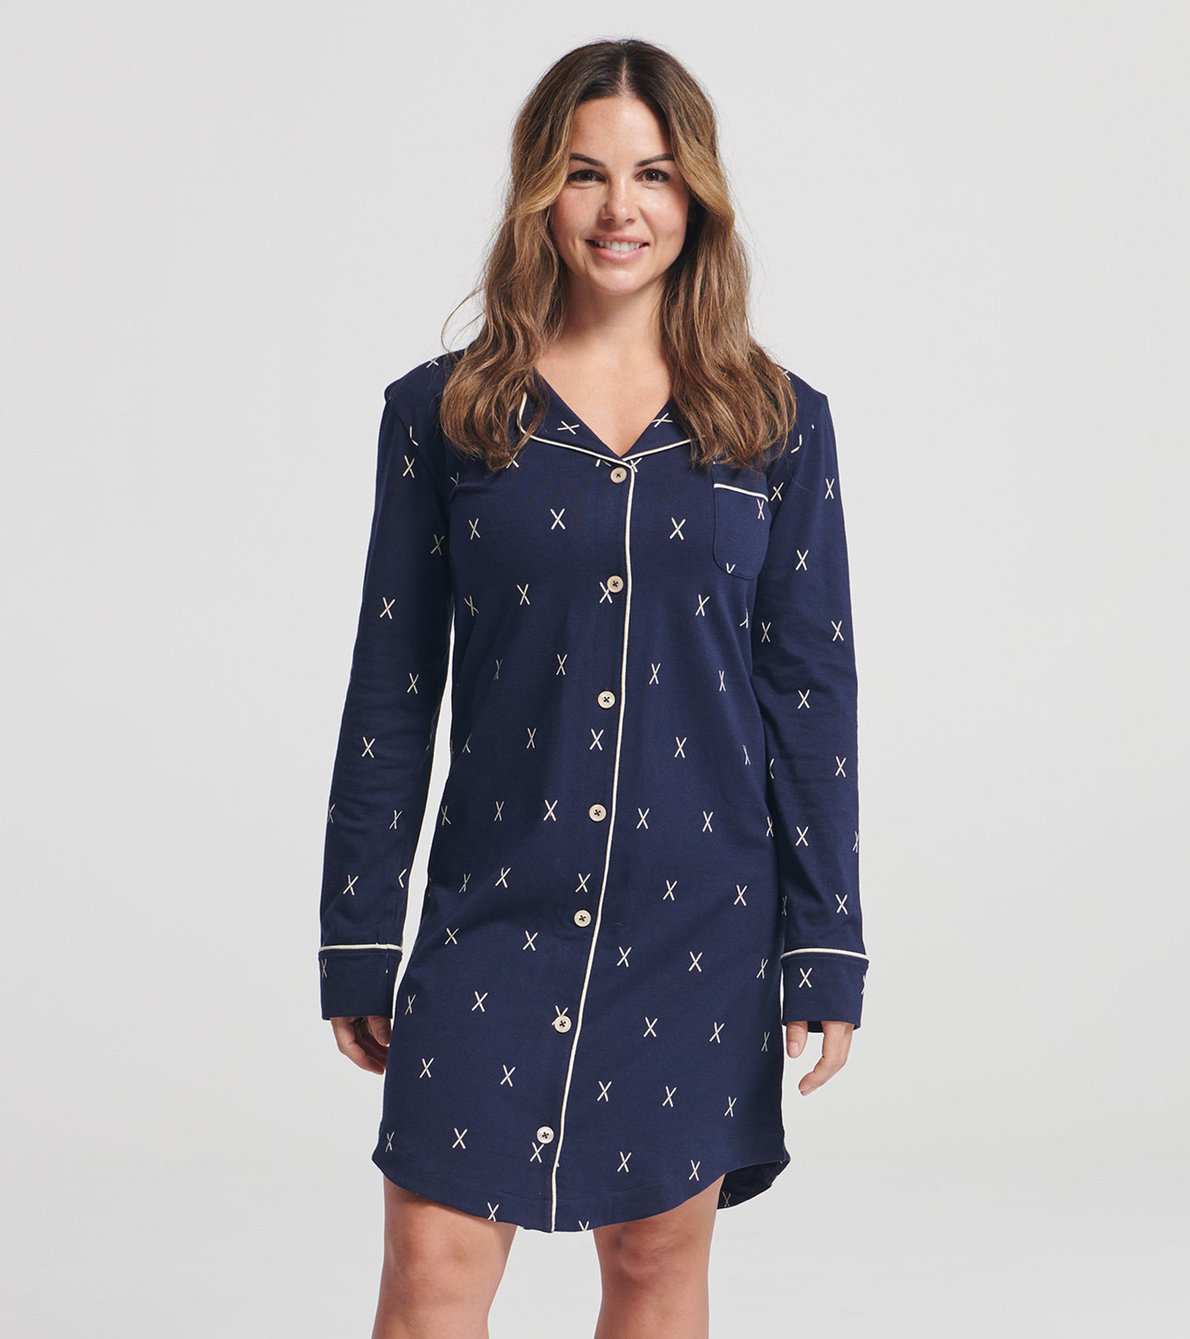 View larger image of Women's Navy Ski Stretch Jersey Nightgown